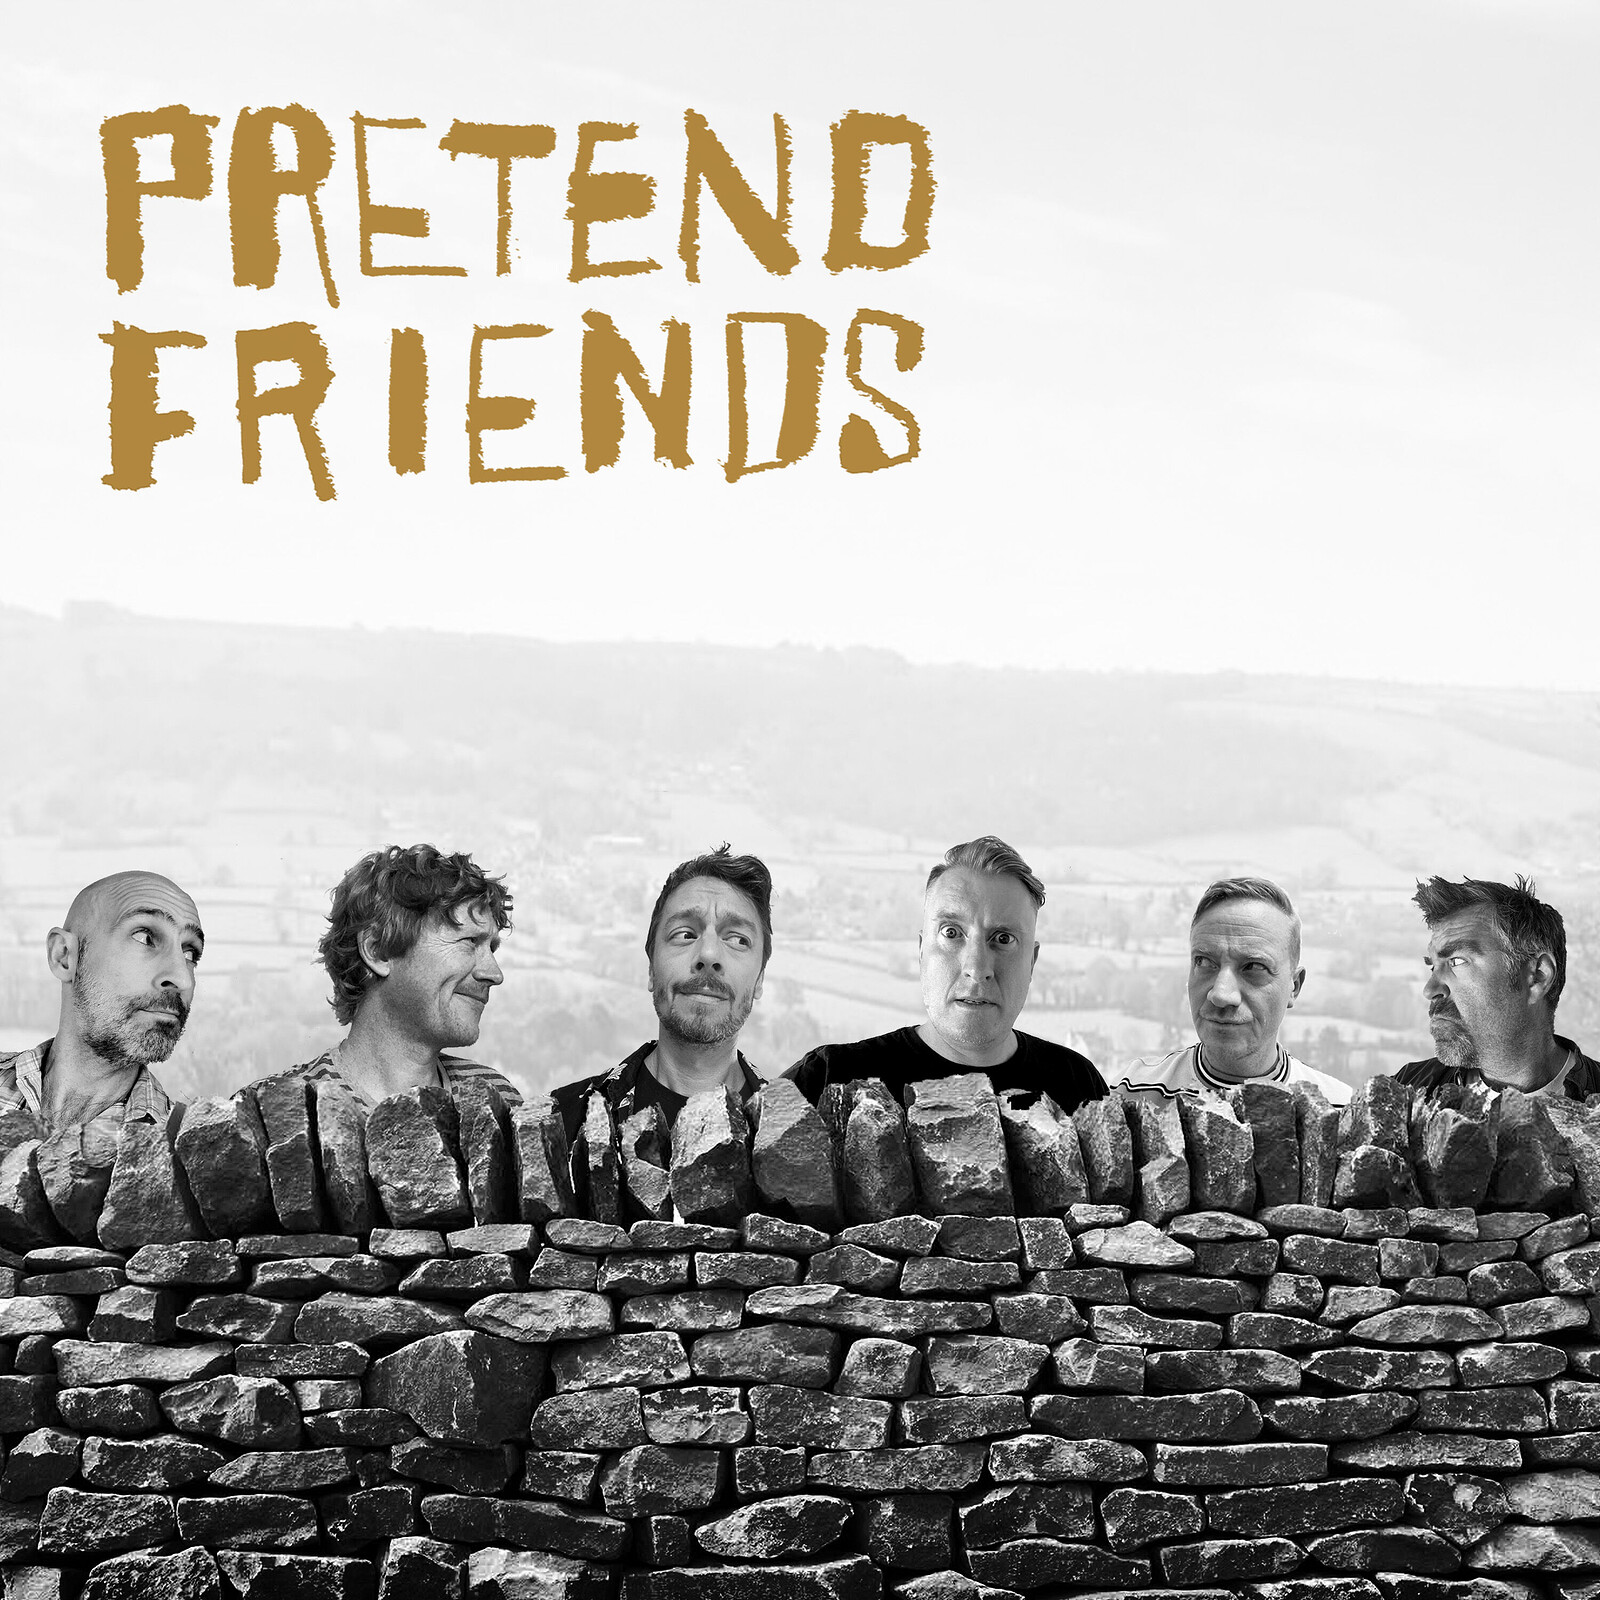 Pretend Friends at The Canteen